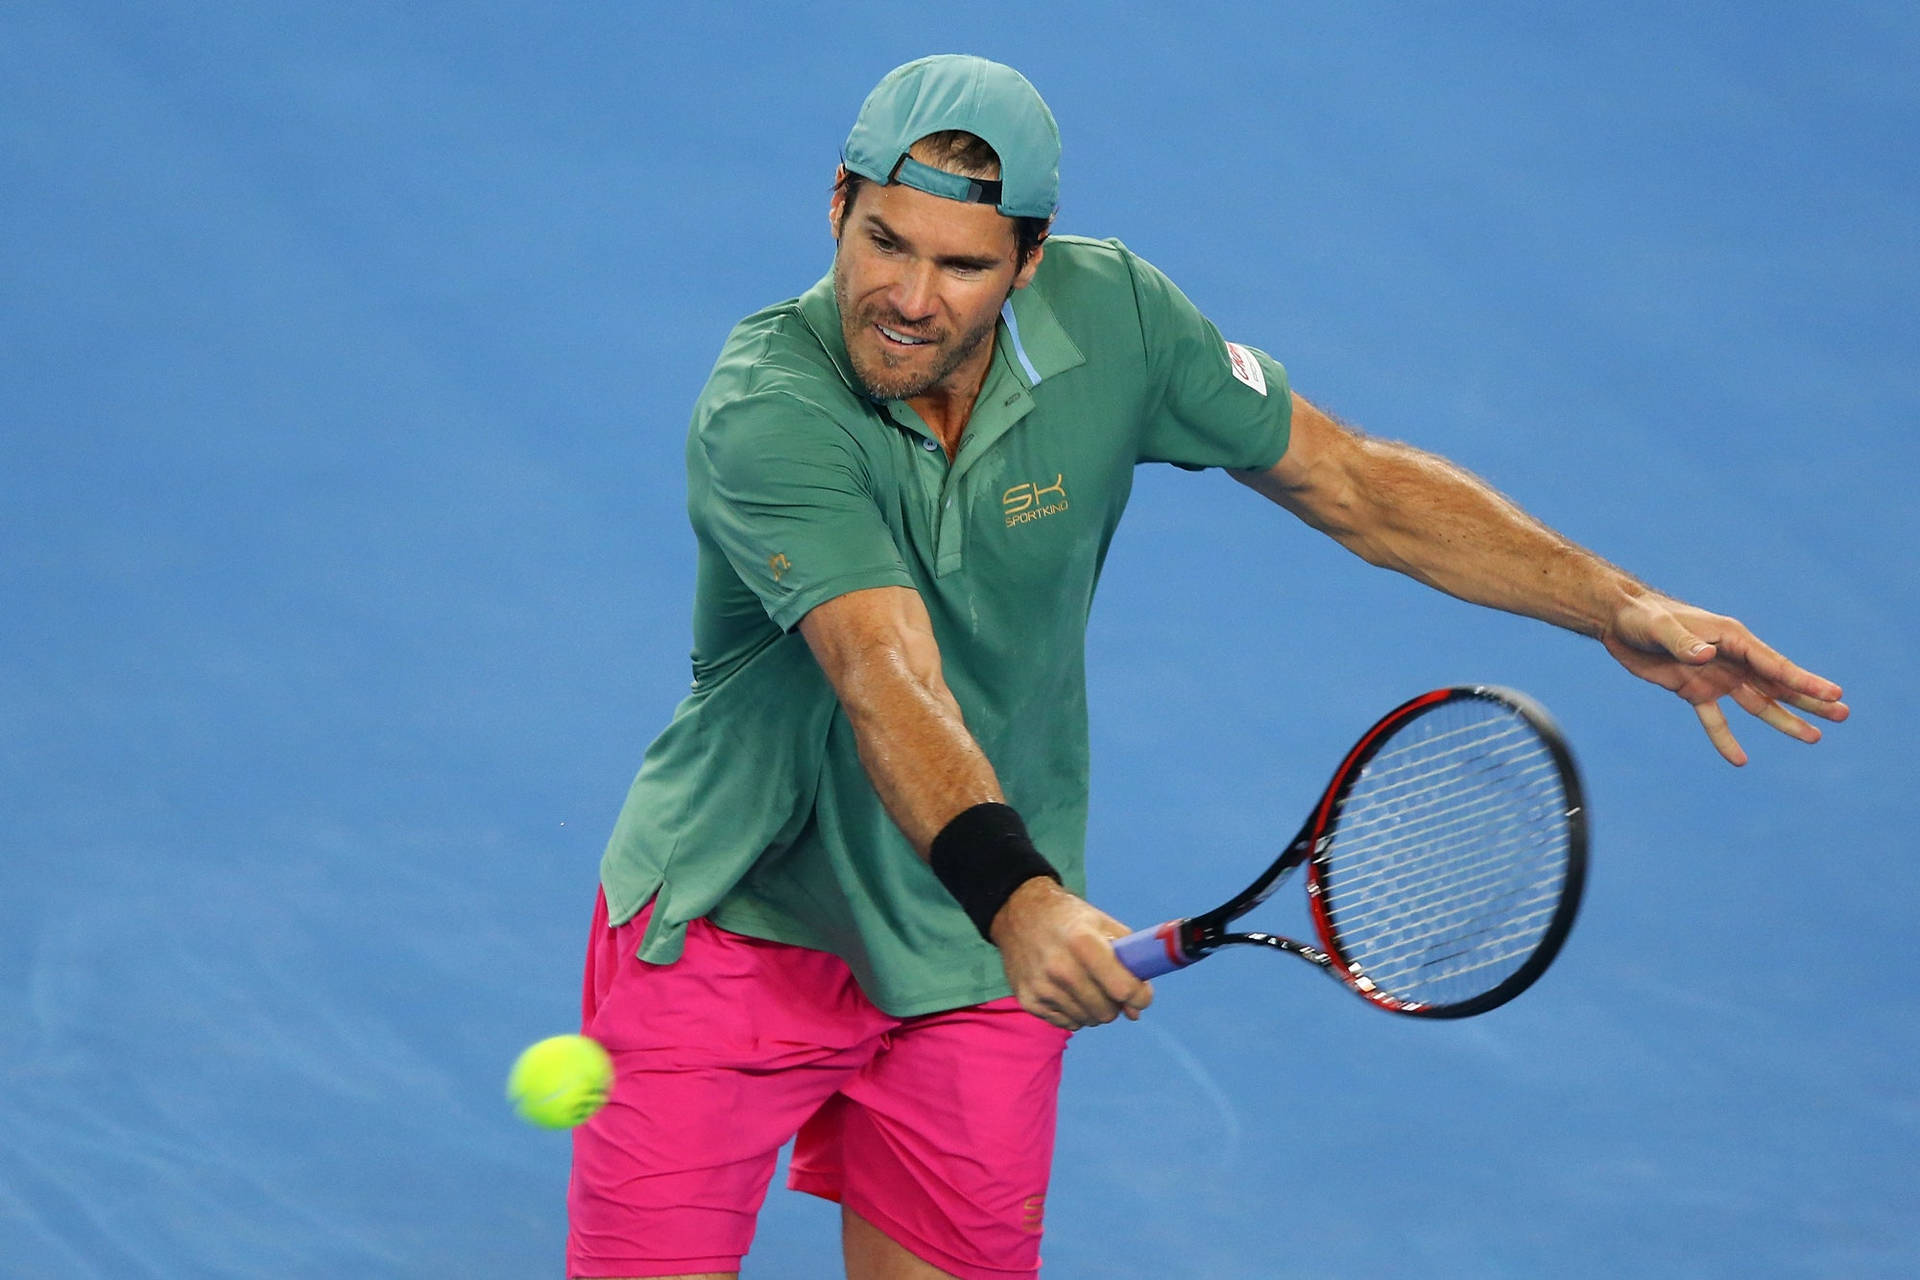 Grinning Tommy Haas Wallpaper